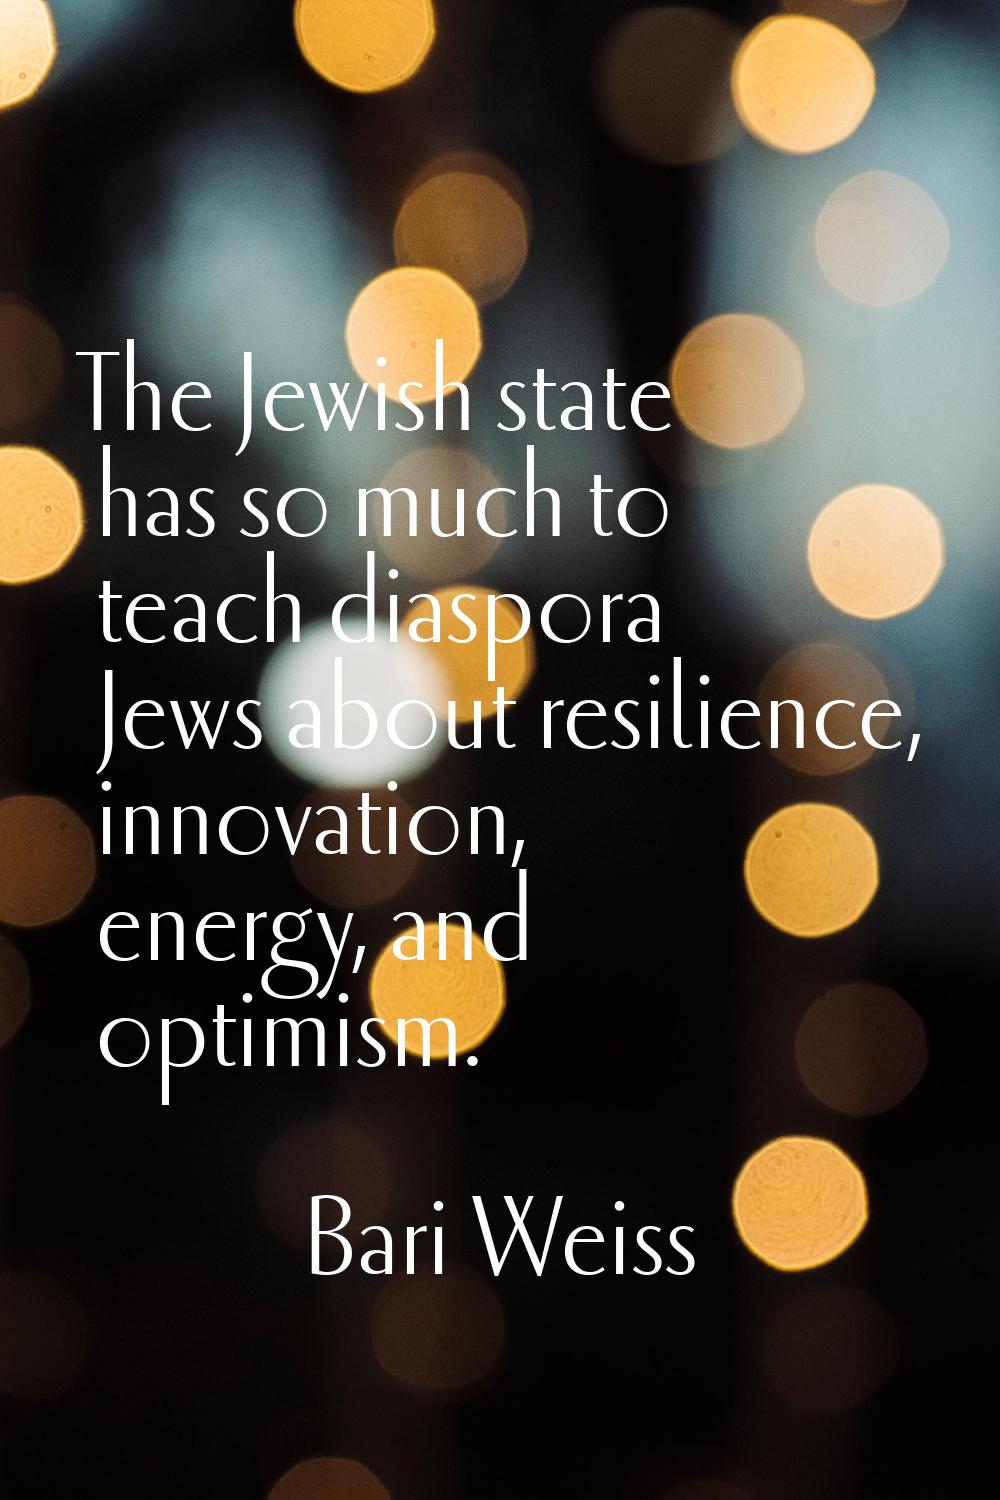 The Jewish state has so much to teach diaspora Jews about resilience, innovation, energy, and optim